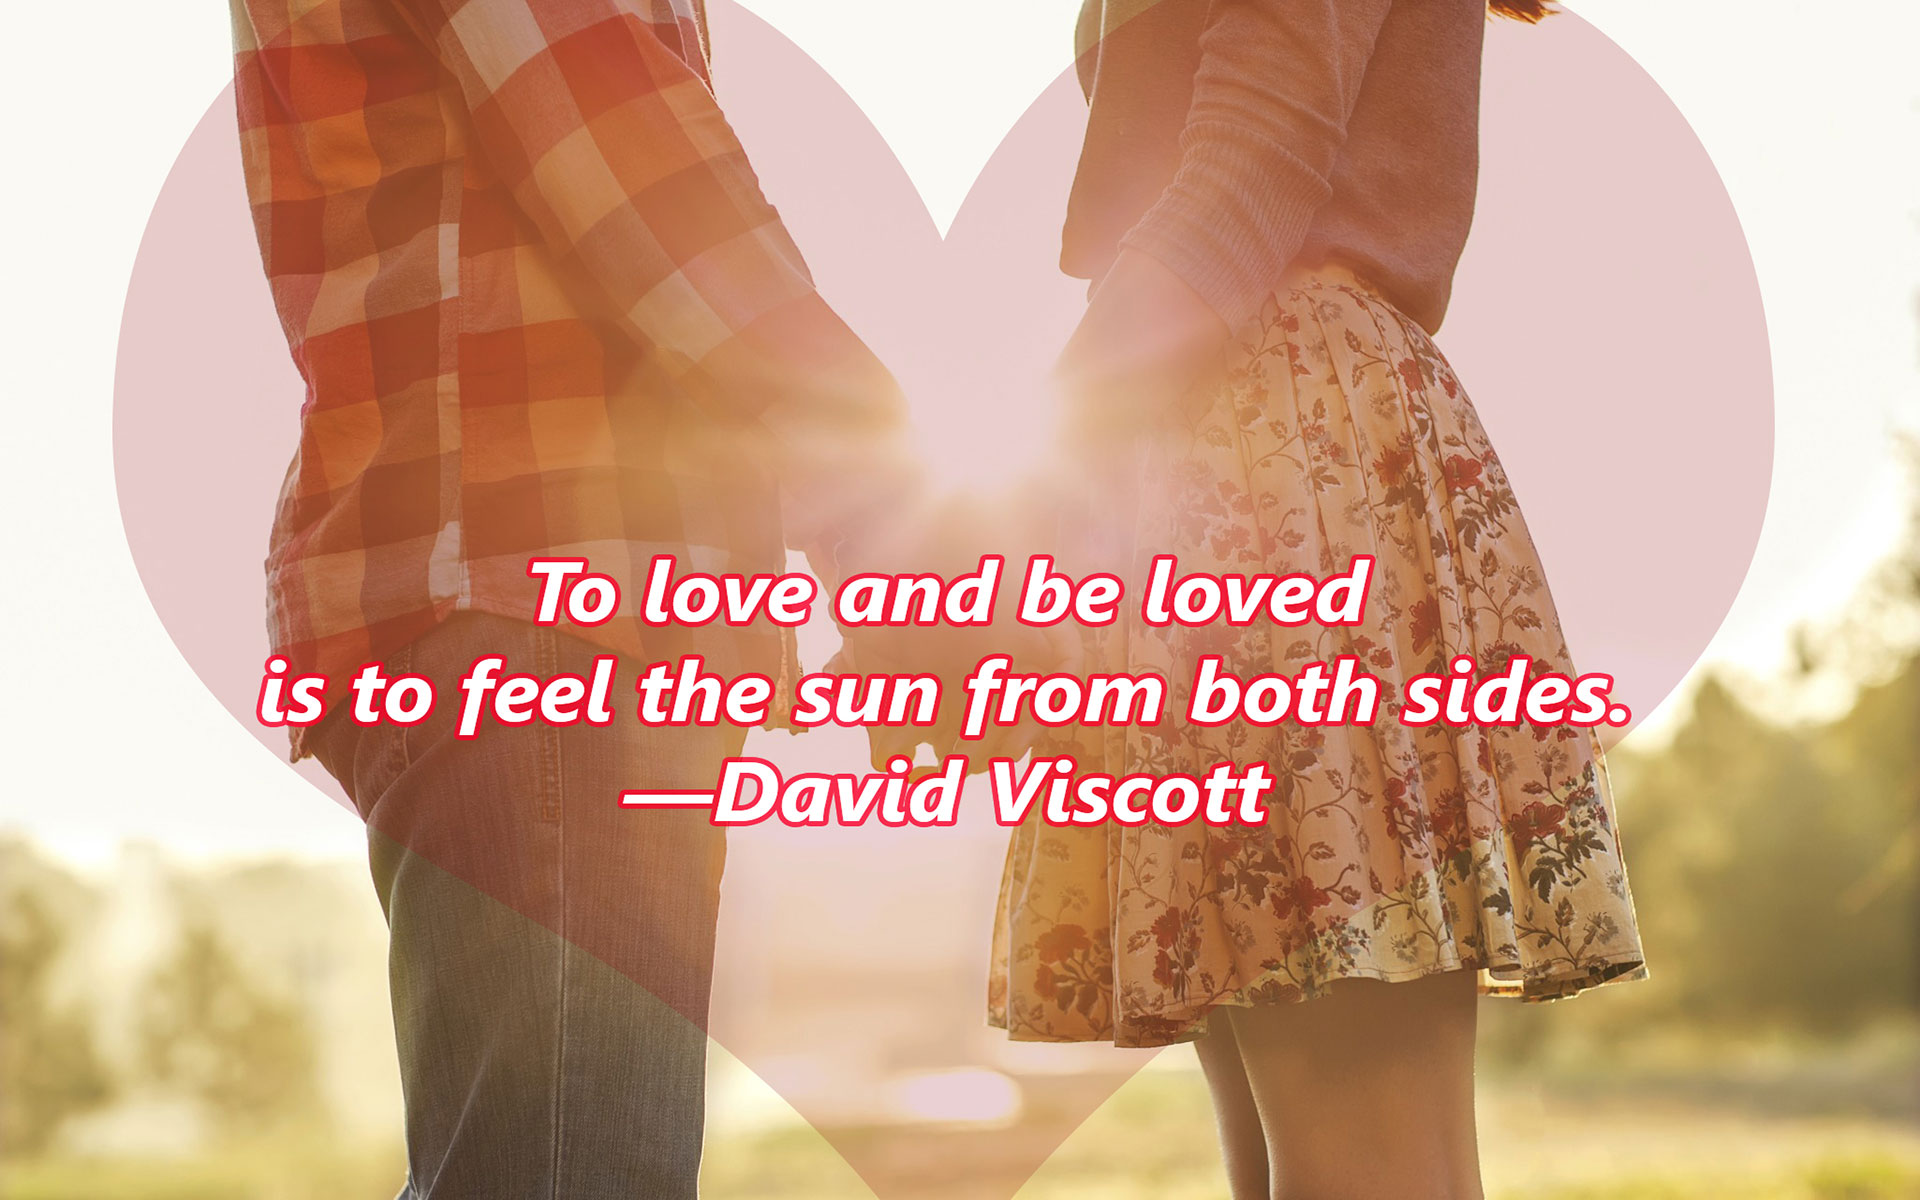 Cute Couple Wallpapers With Quotes 1080p Cute, Photos, - Person Falling In Love - HD Wallpaper 